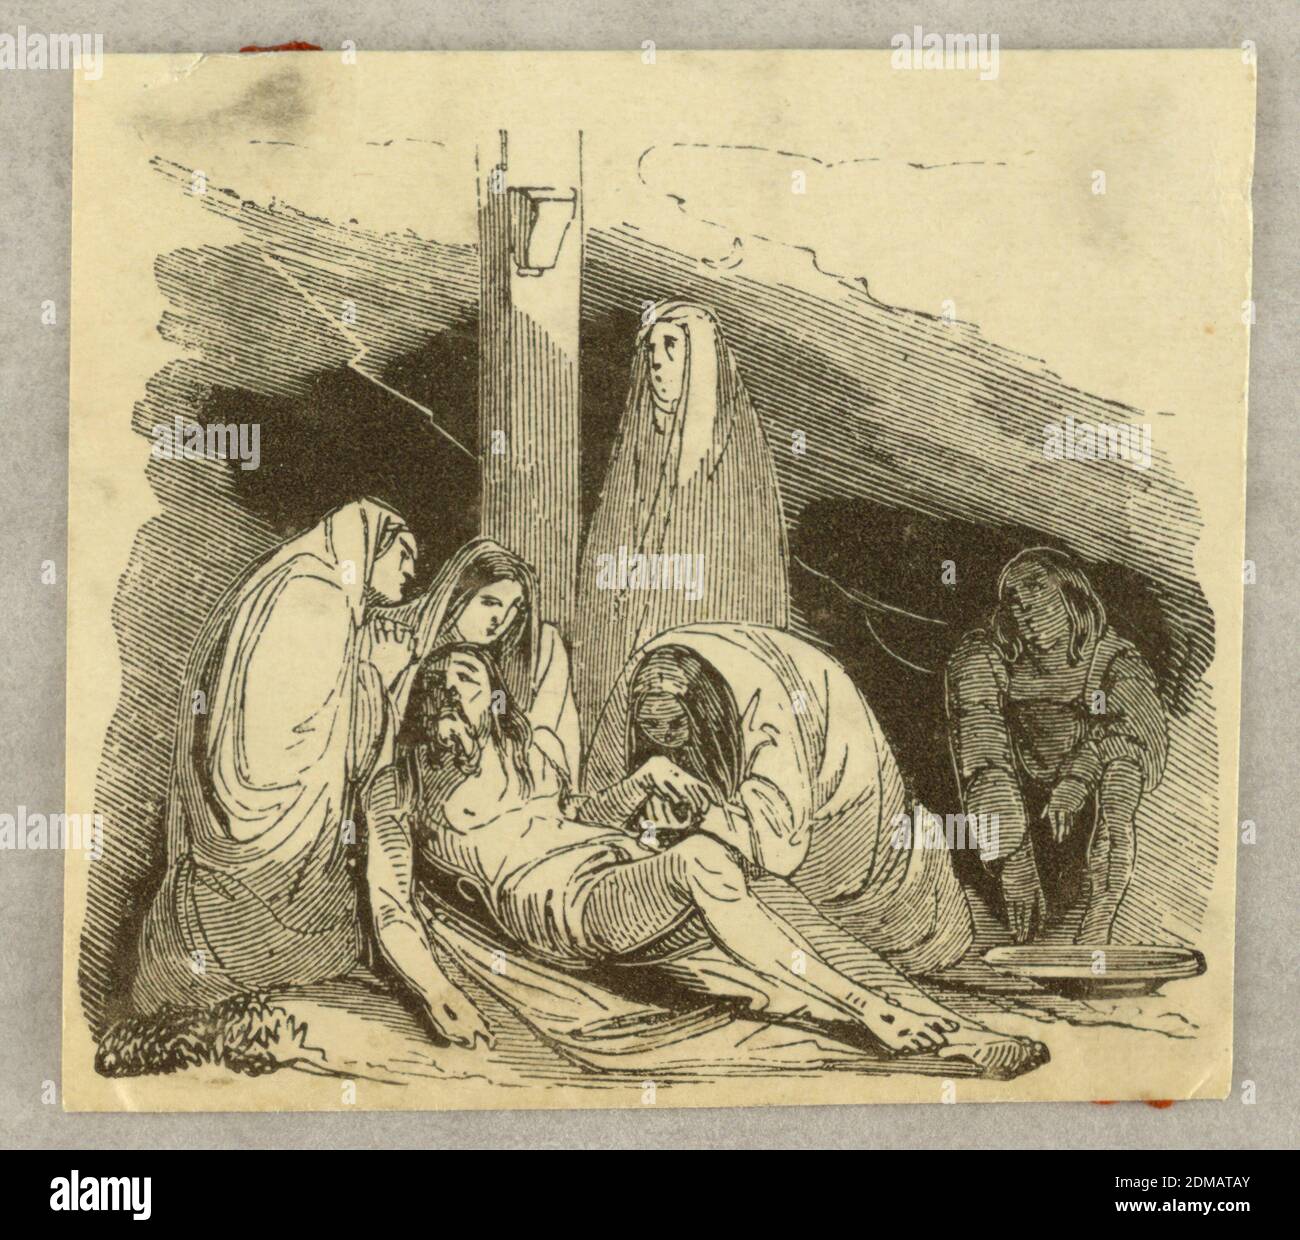 The Deposition, Wood engraving on paper, Mary Magdalene kissing the hand of the lord whose head is held by the Virgin. St. John and two more women are present., France, 1840s, Print Stock Photo